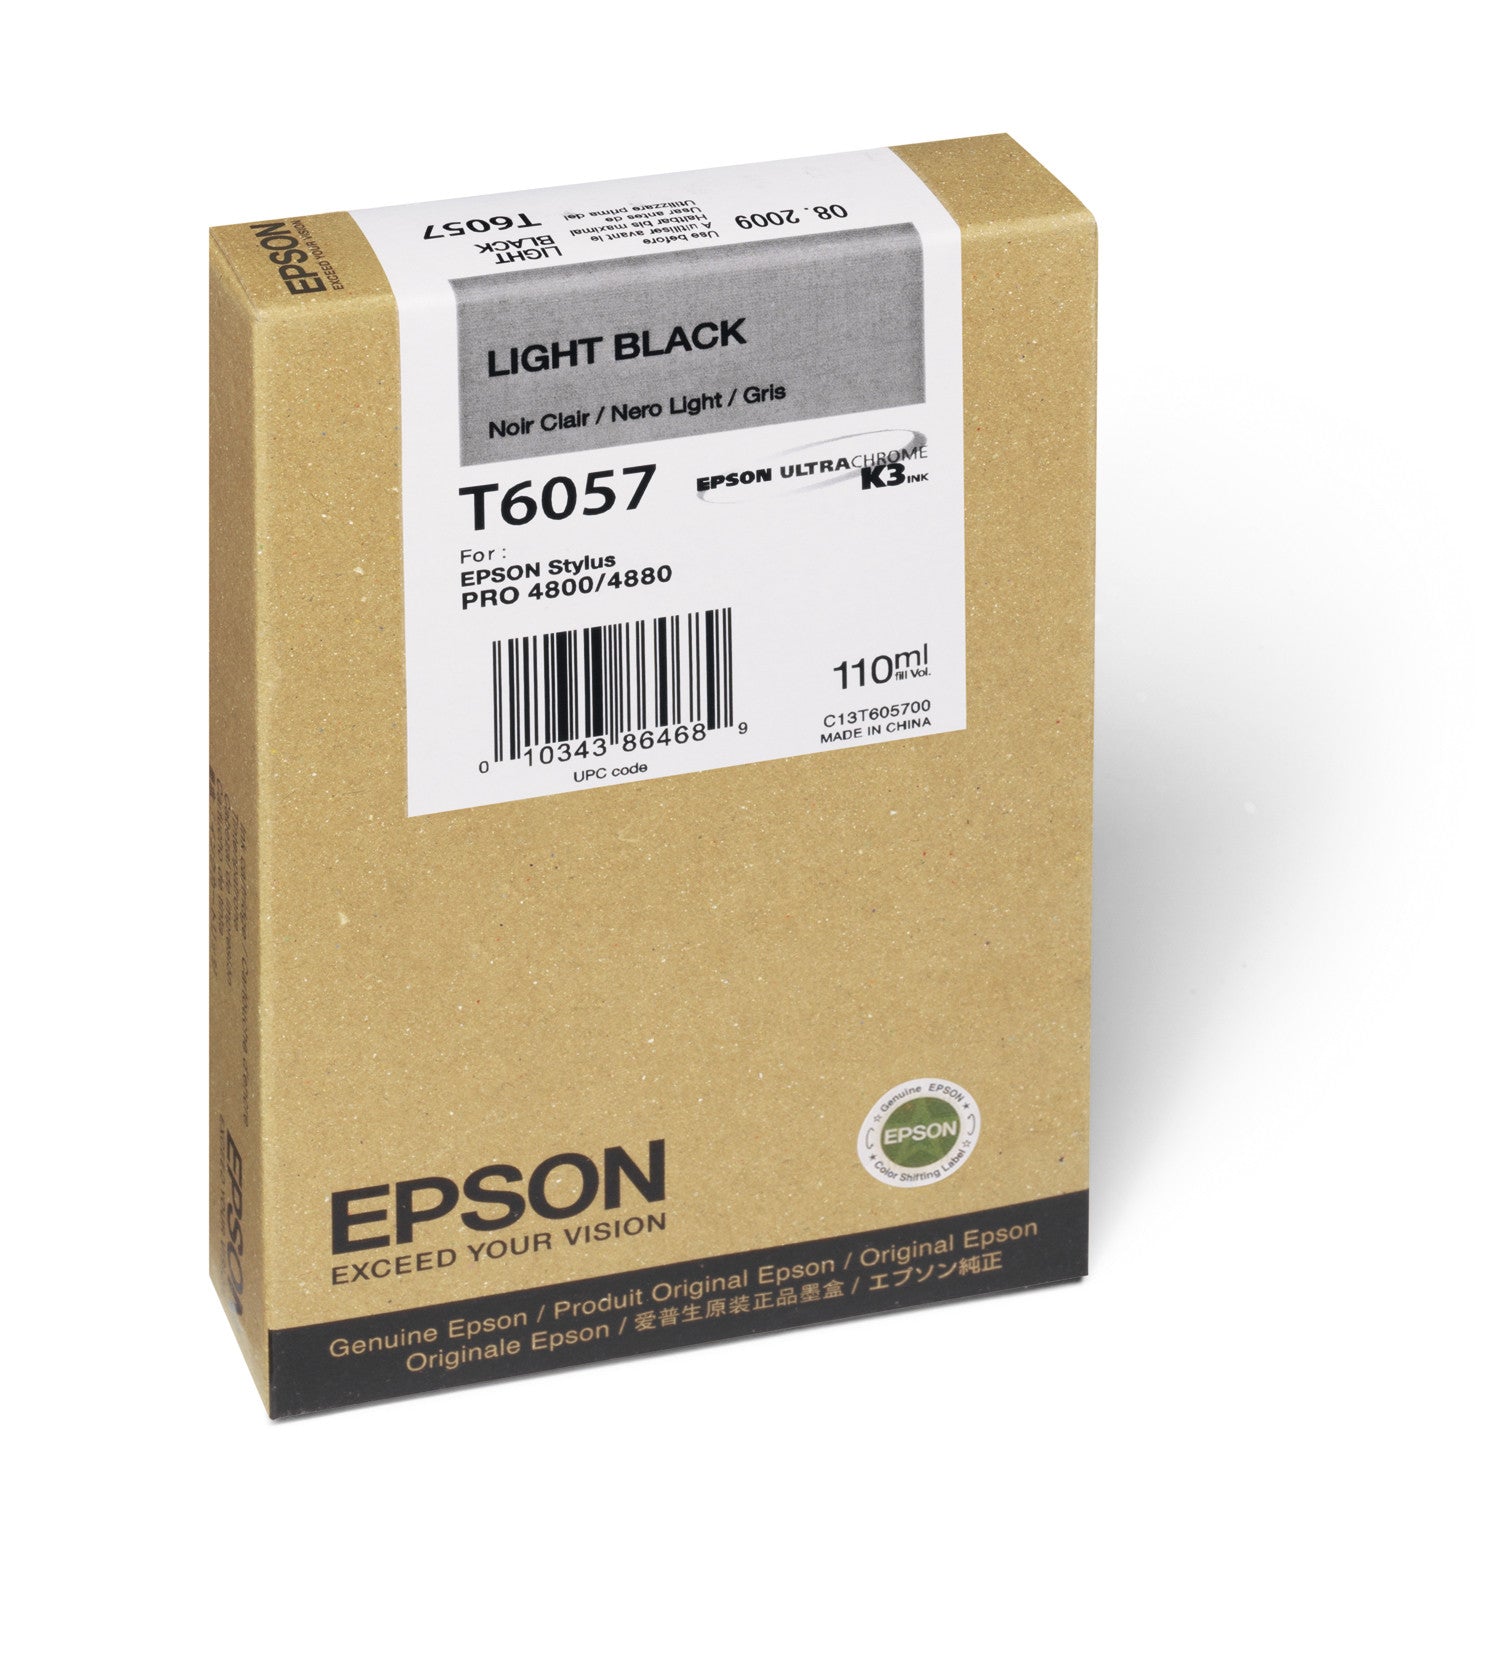 Epson T605700 4880/4800 Ultrachrome HDR Ink Light Black 110ml, papers ink large format, Epson - Pictureline 